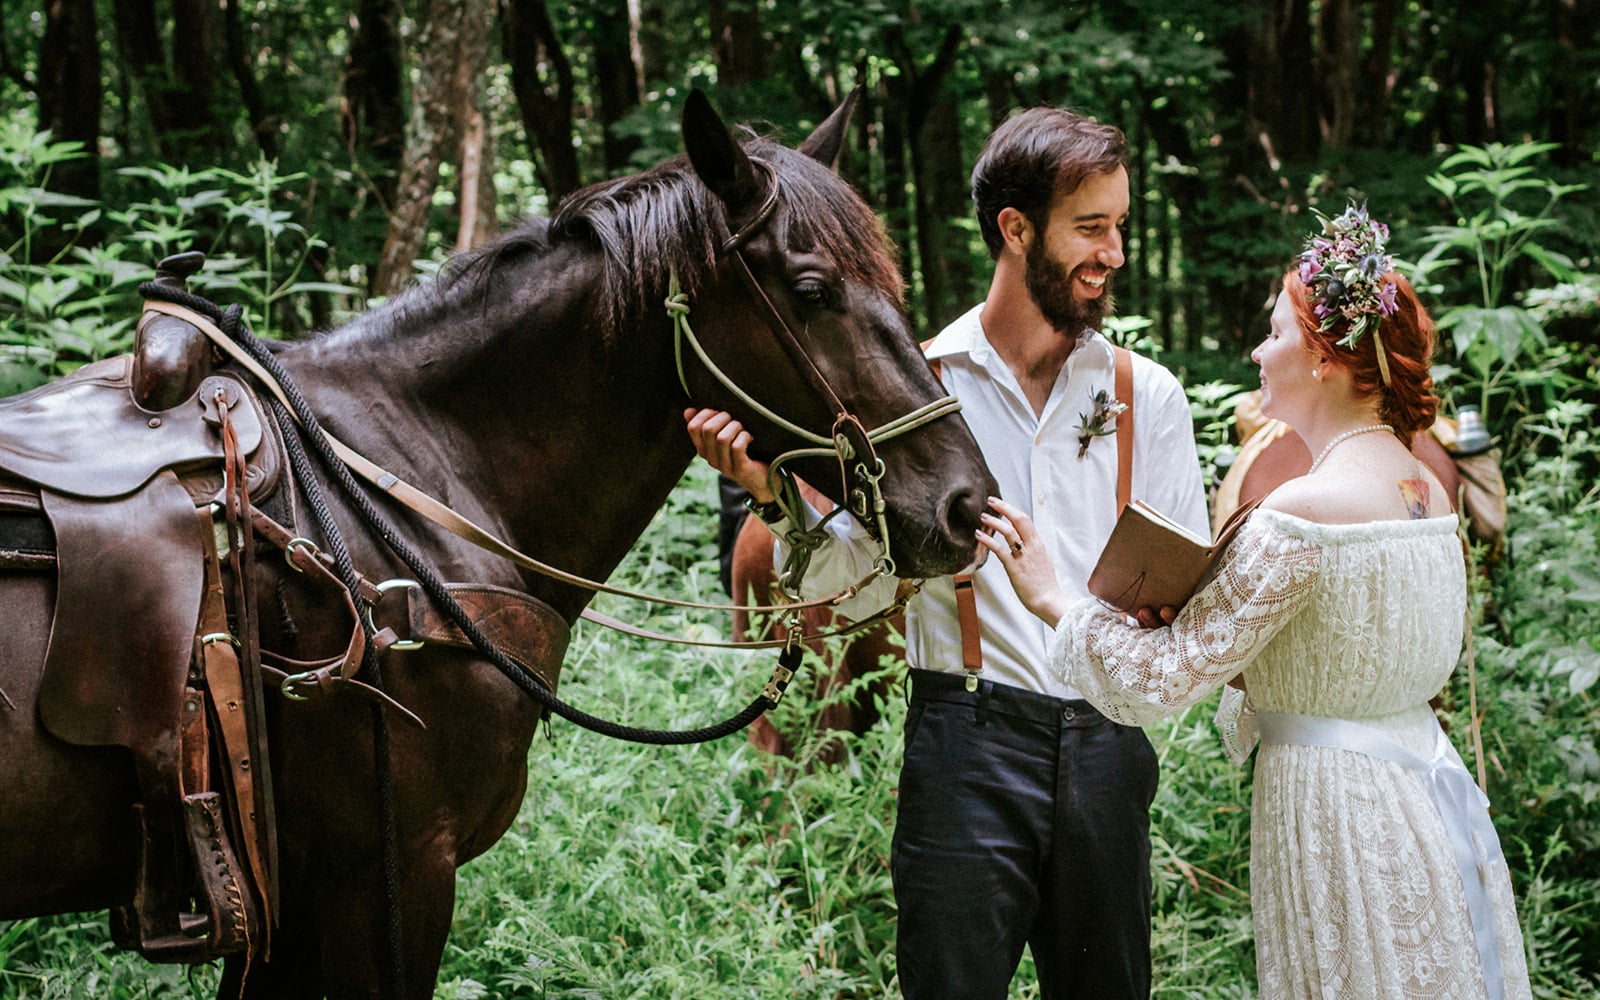 This is a picture of a bride and groom sharing their vows in the forest and being interrupted by a horse.